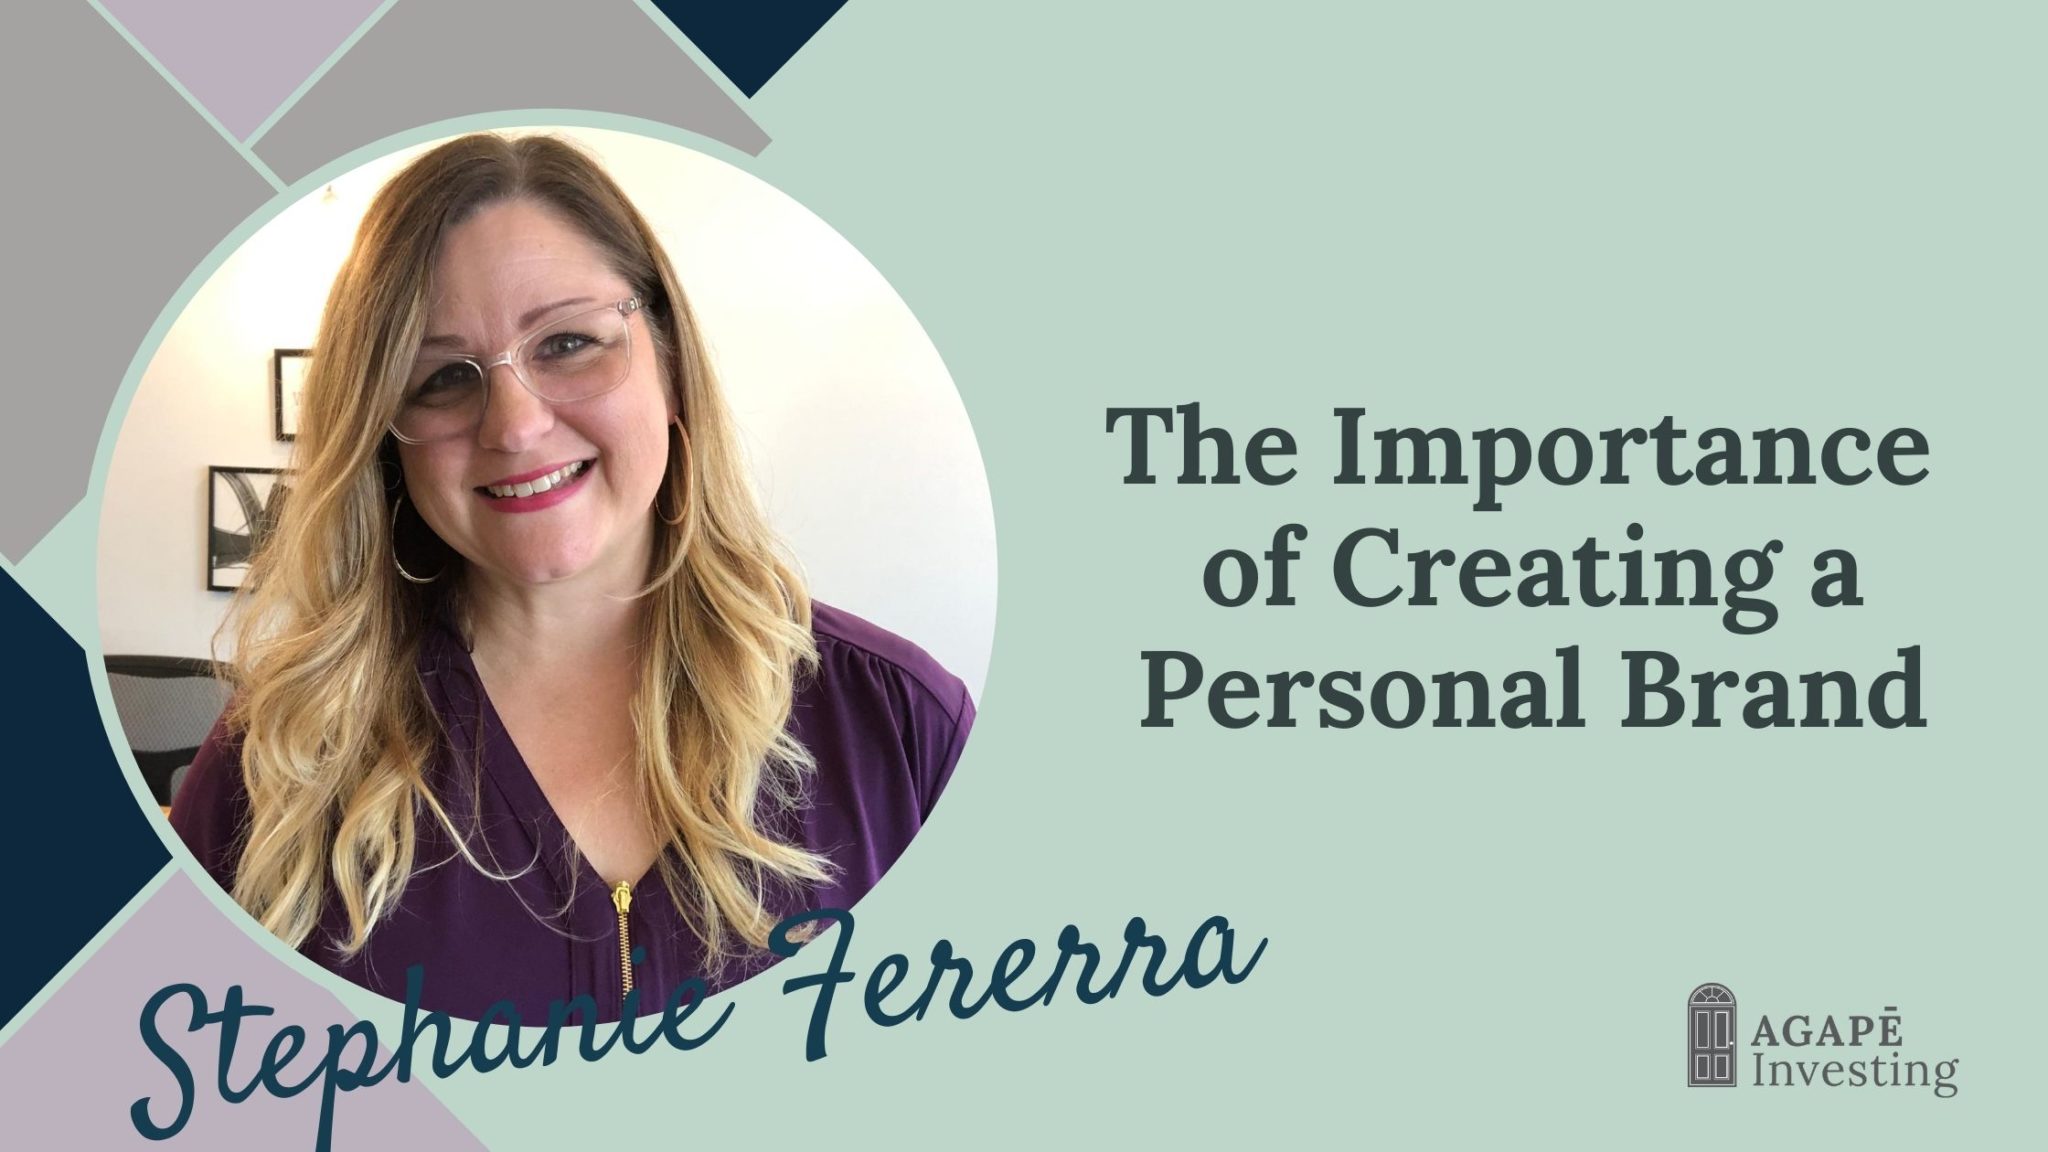 The Importance of Creating a Personal Brand - Stephanie Fererra